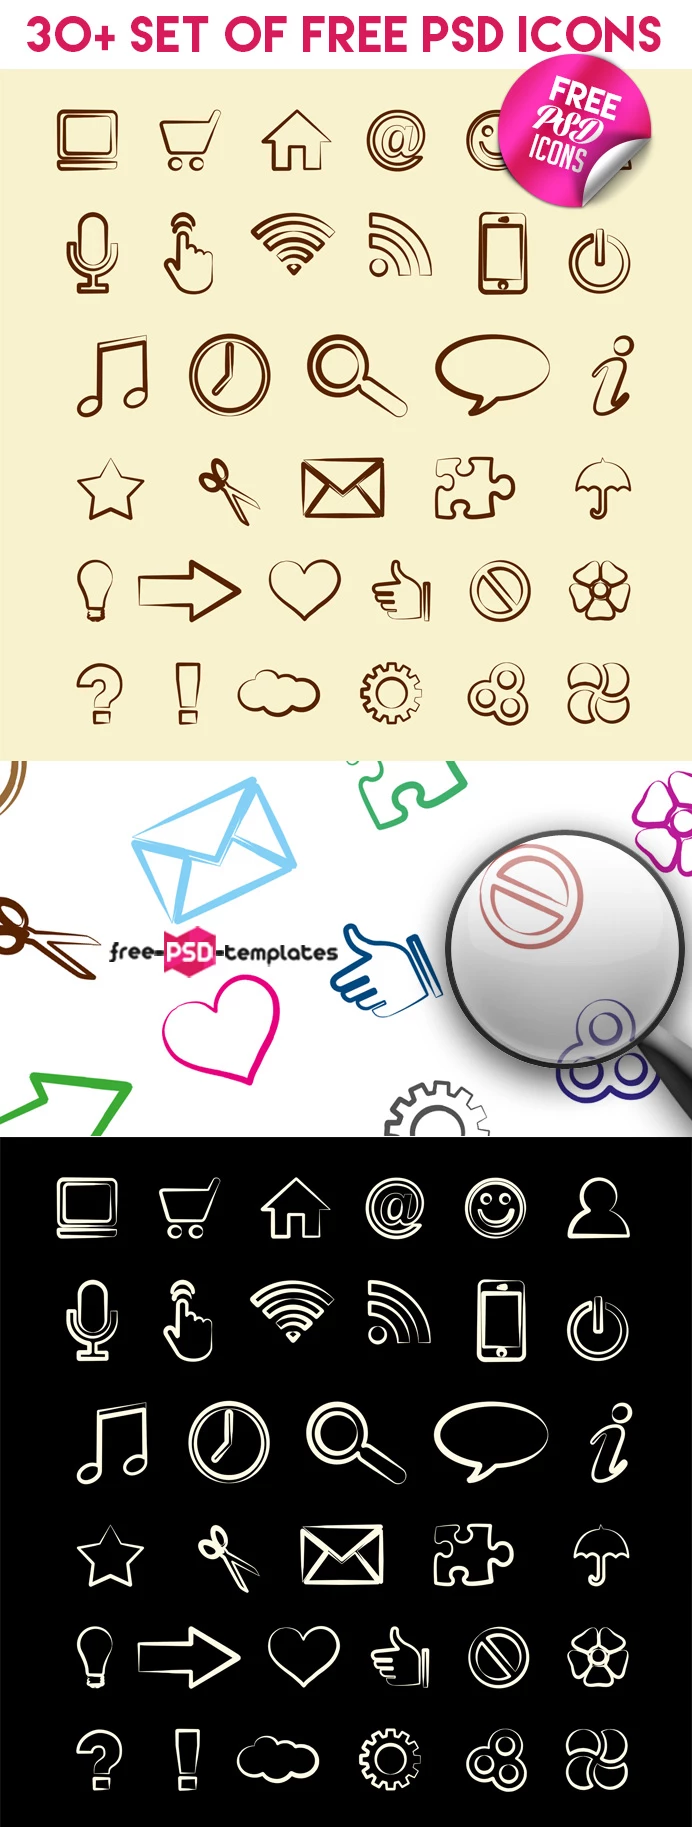 Preview_30+Set_of_Free_PSD_Icons